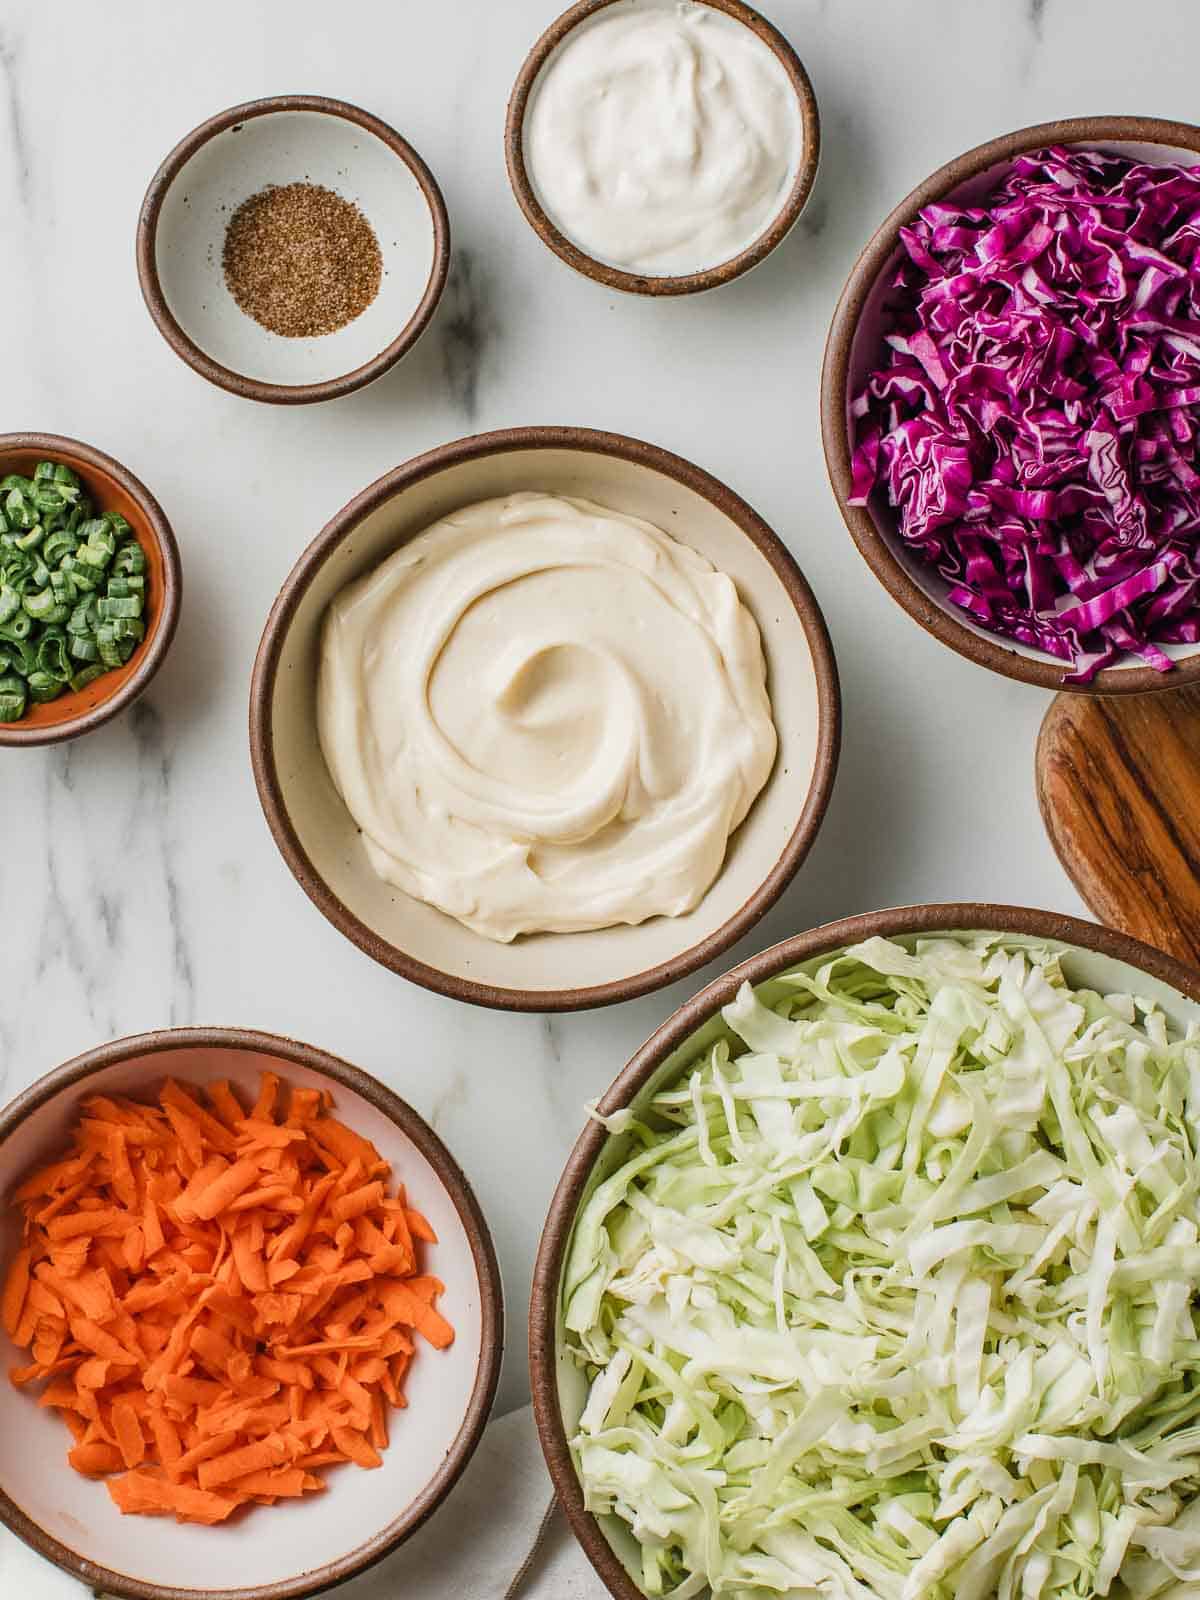 Creamy coleslaw ingredients on a table.